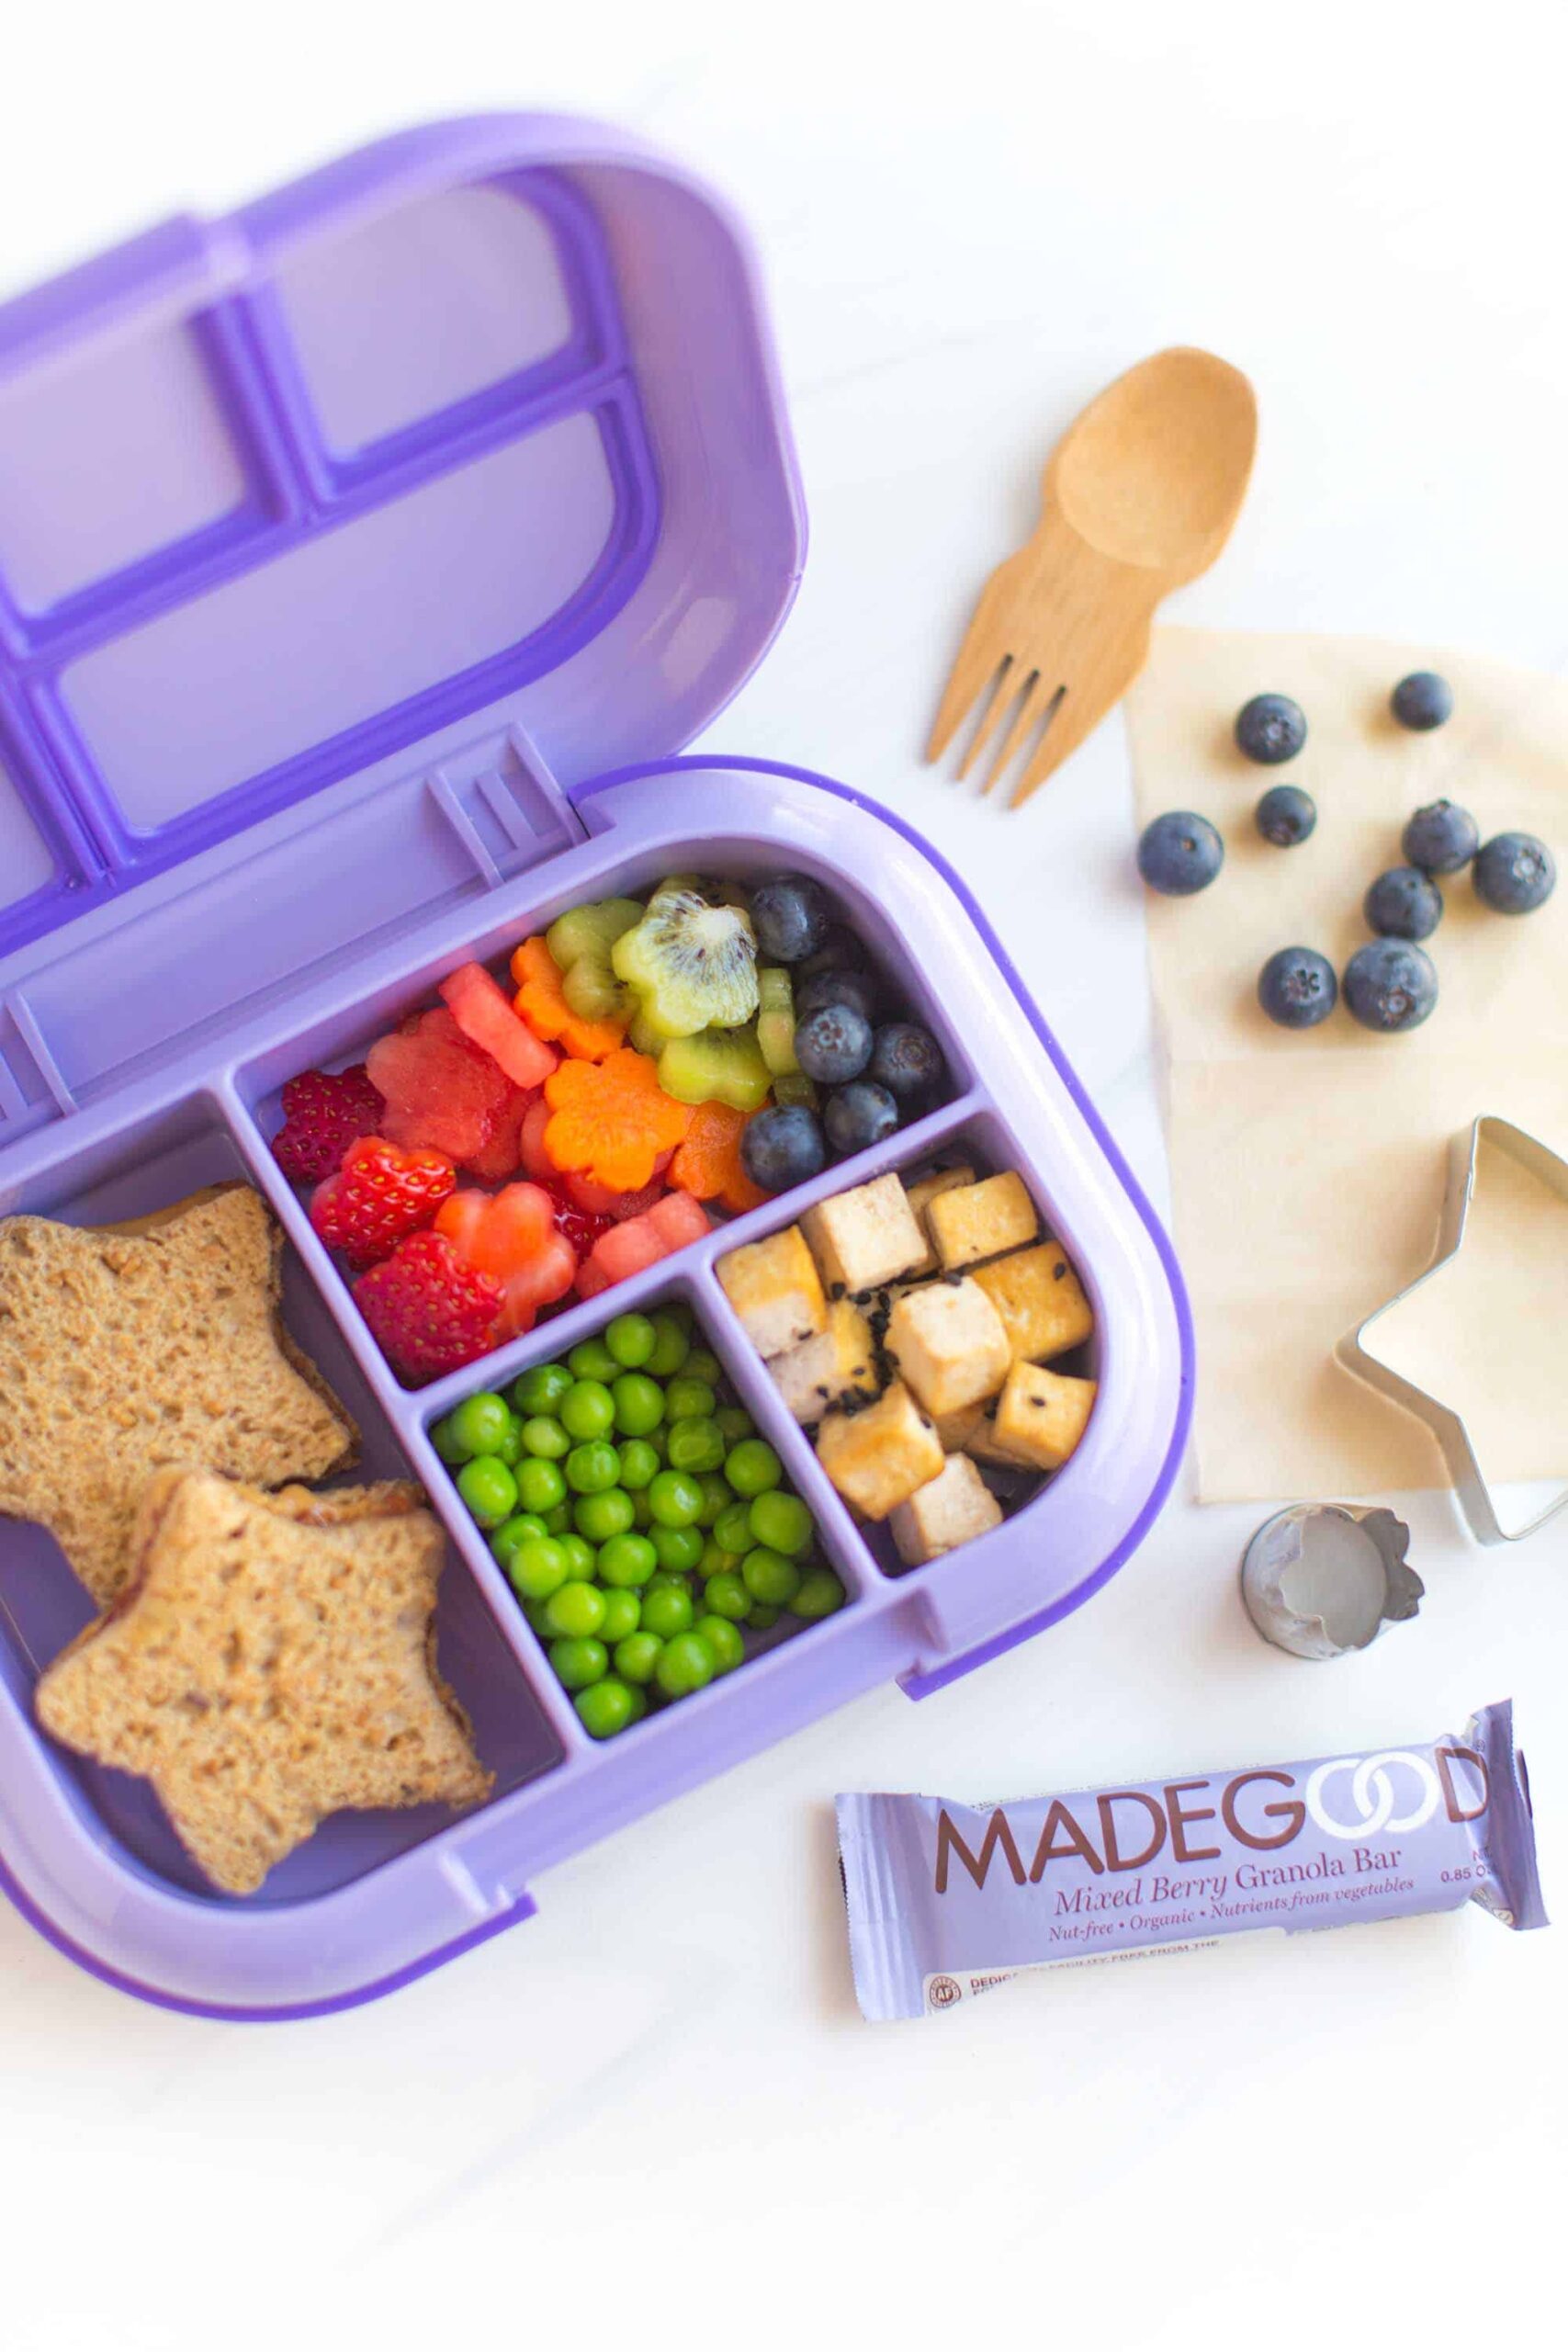 Kids lunch box packed with tofu, peanut butter and jelly, fruit, peas, and a MadeGood snack bar. 